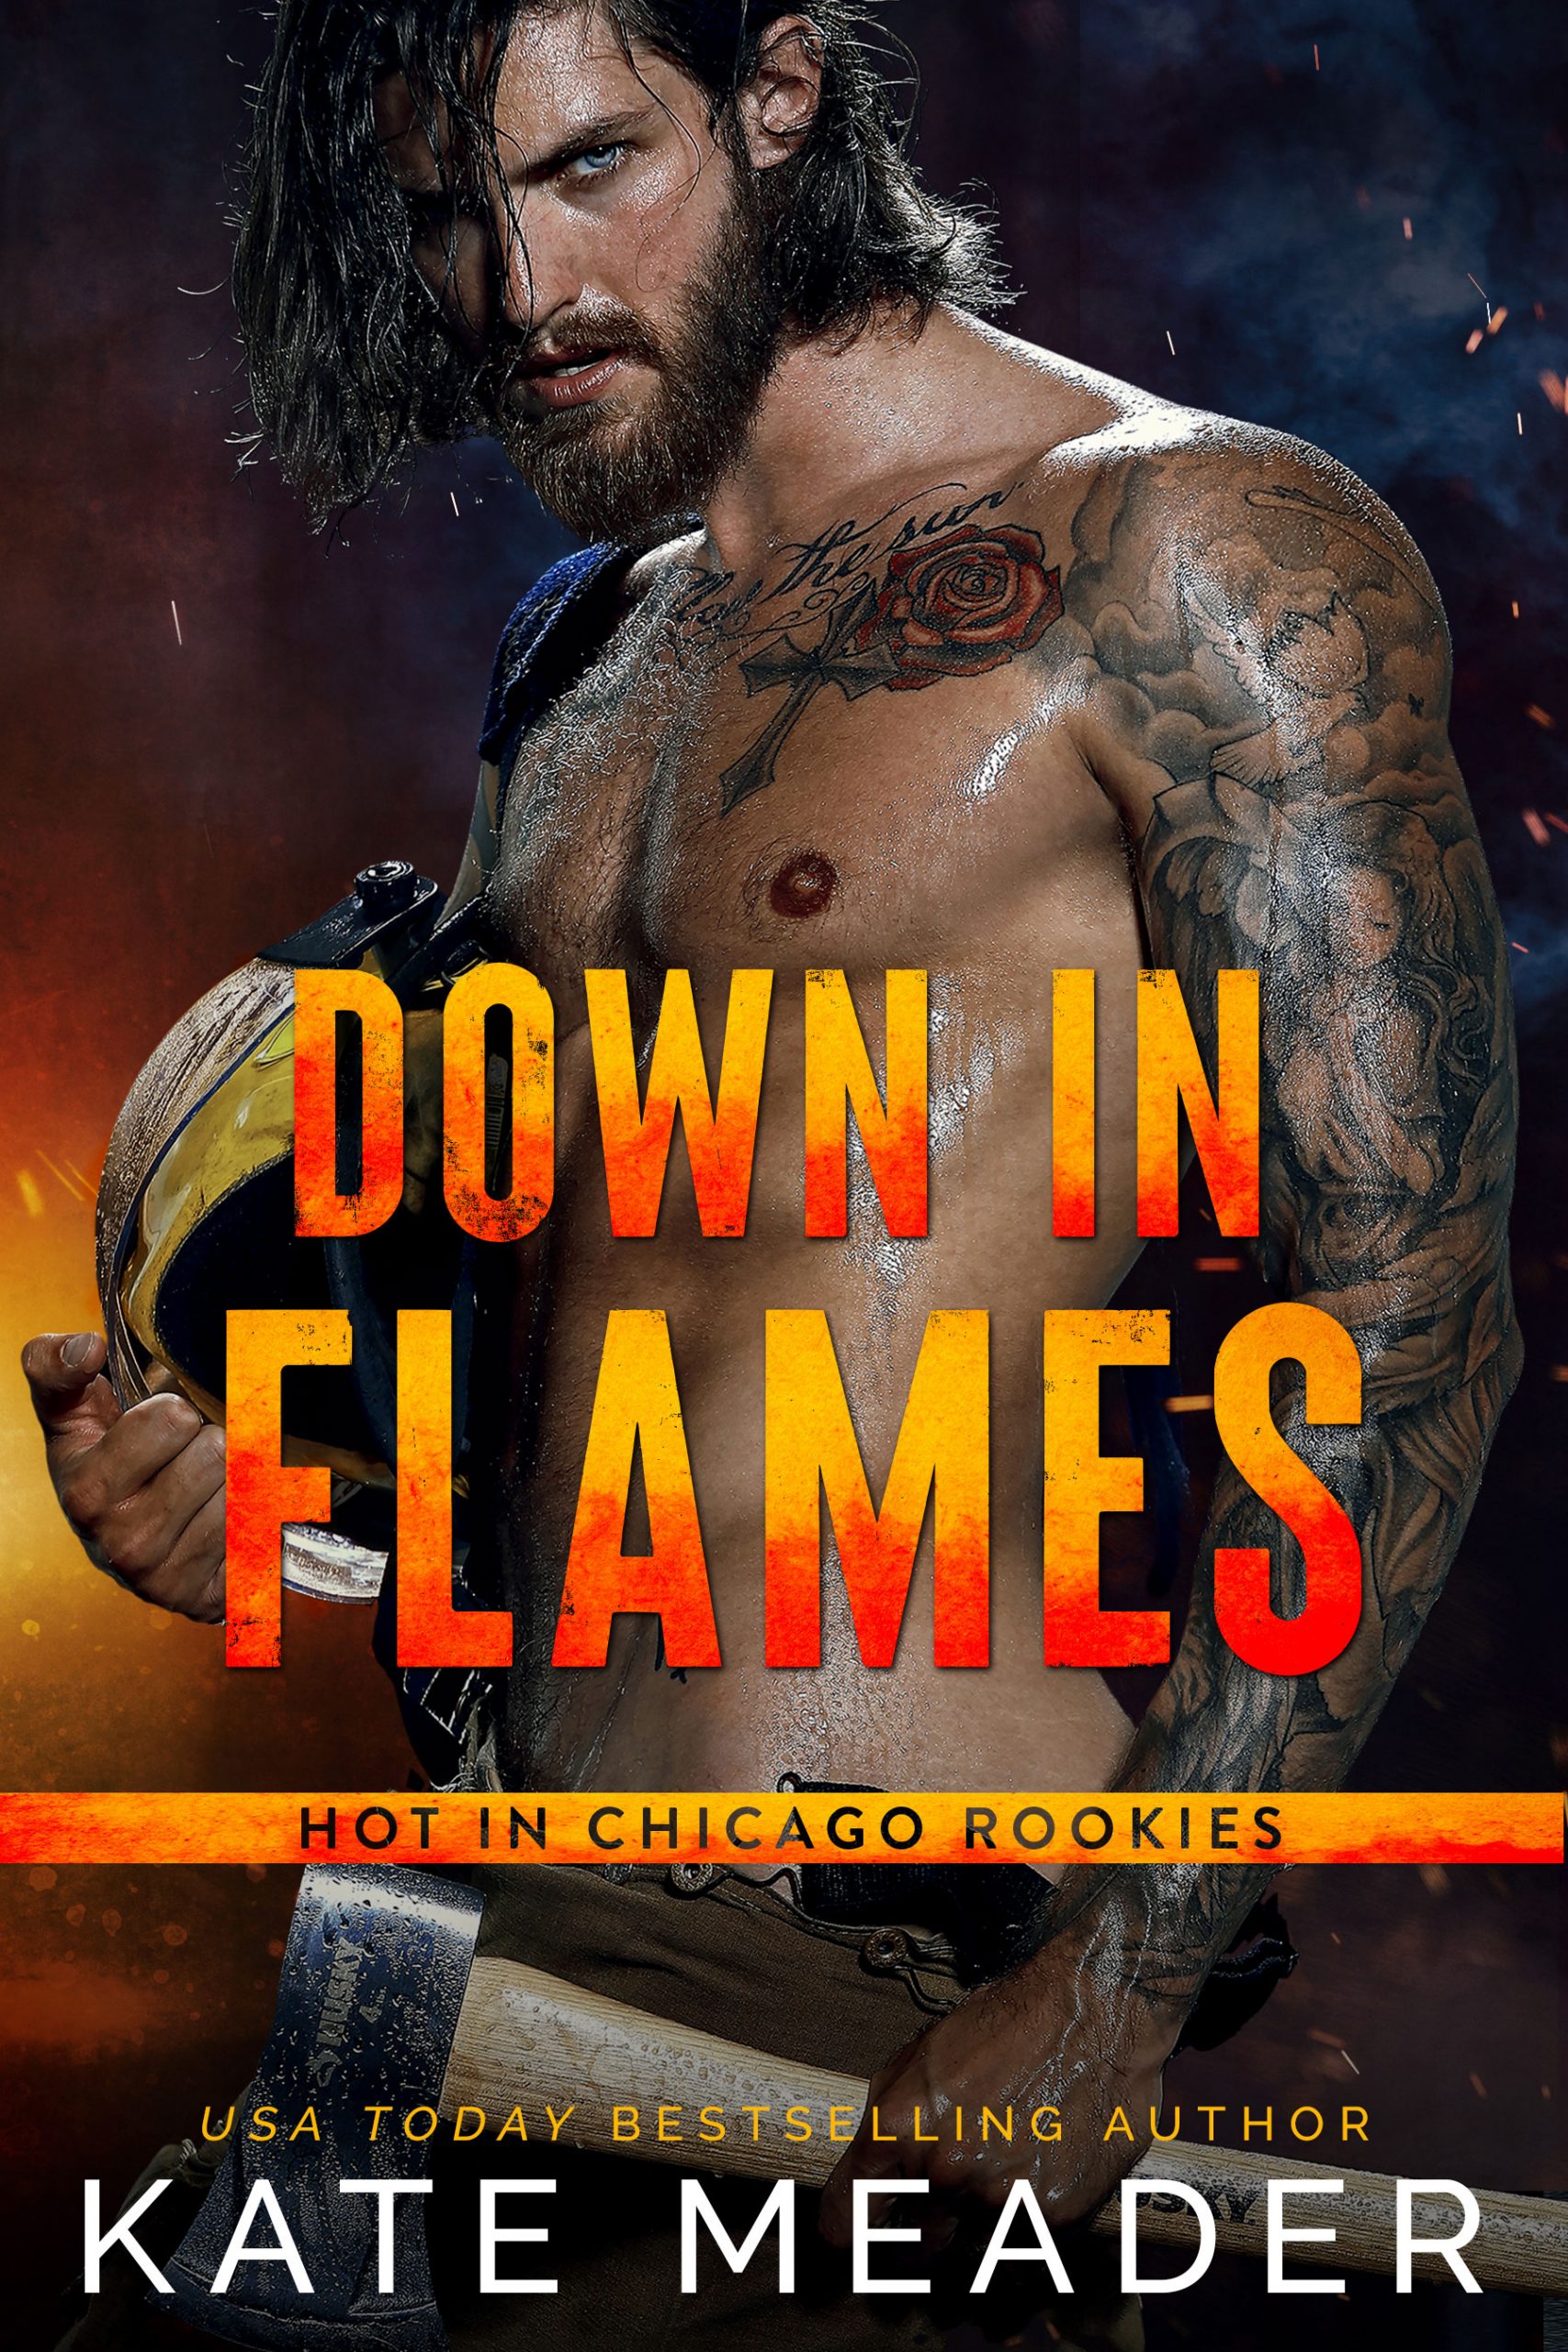 Down in Flames by Kate Meader